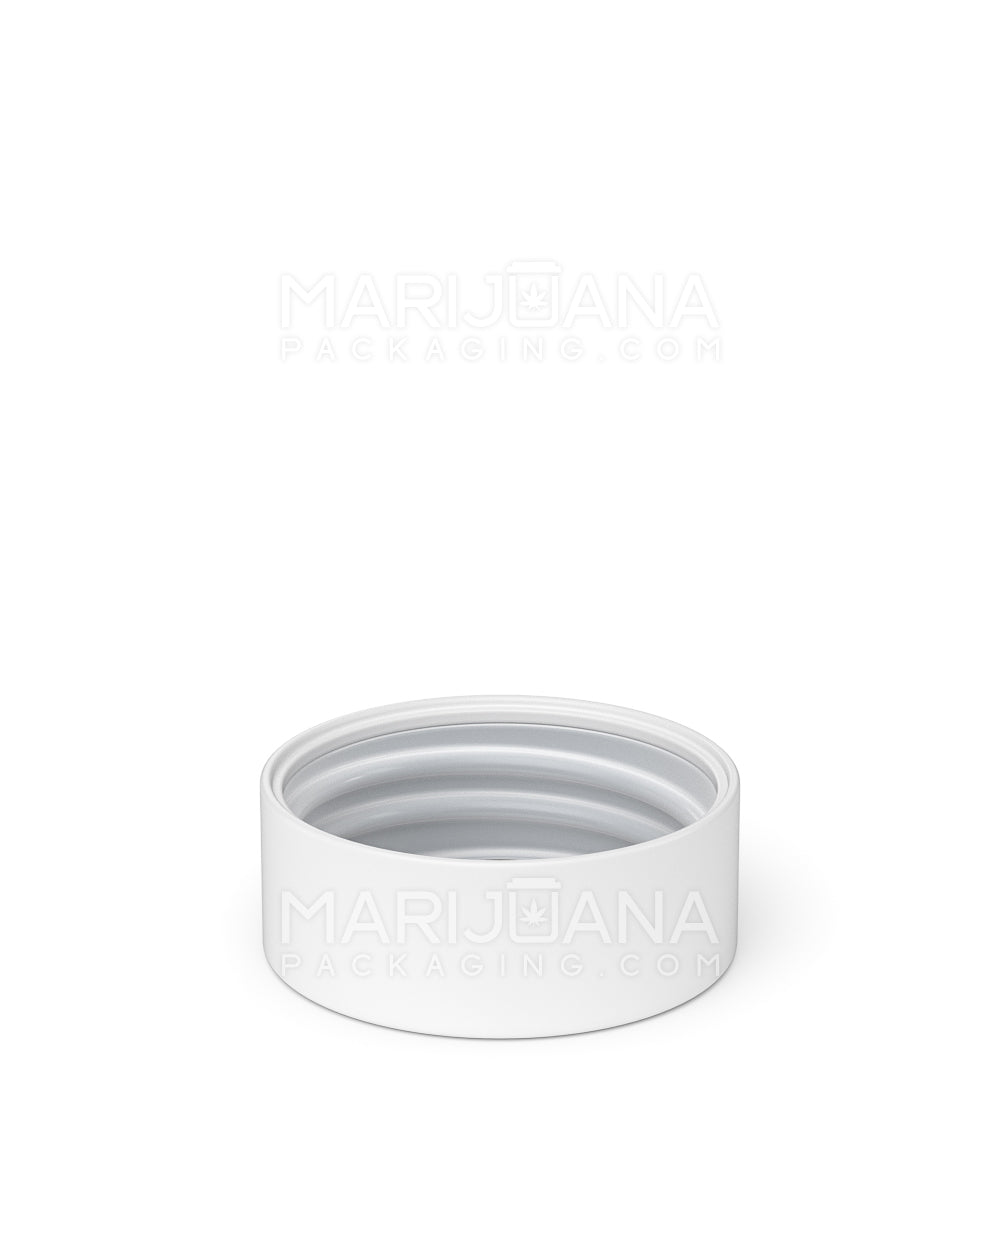 Child Resistant | Smooth Push Down & Turn Plastic Caps w/ Foil & Heat Liner | 38mm - Matte White - 320 Count - 2